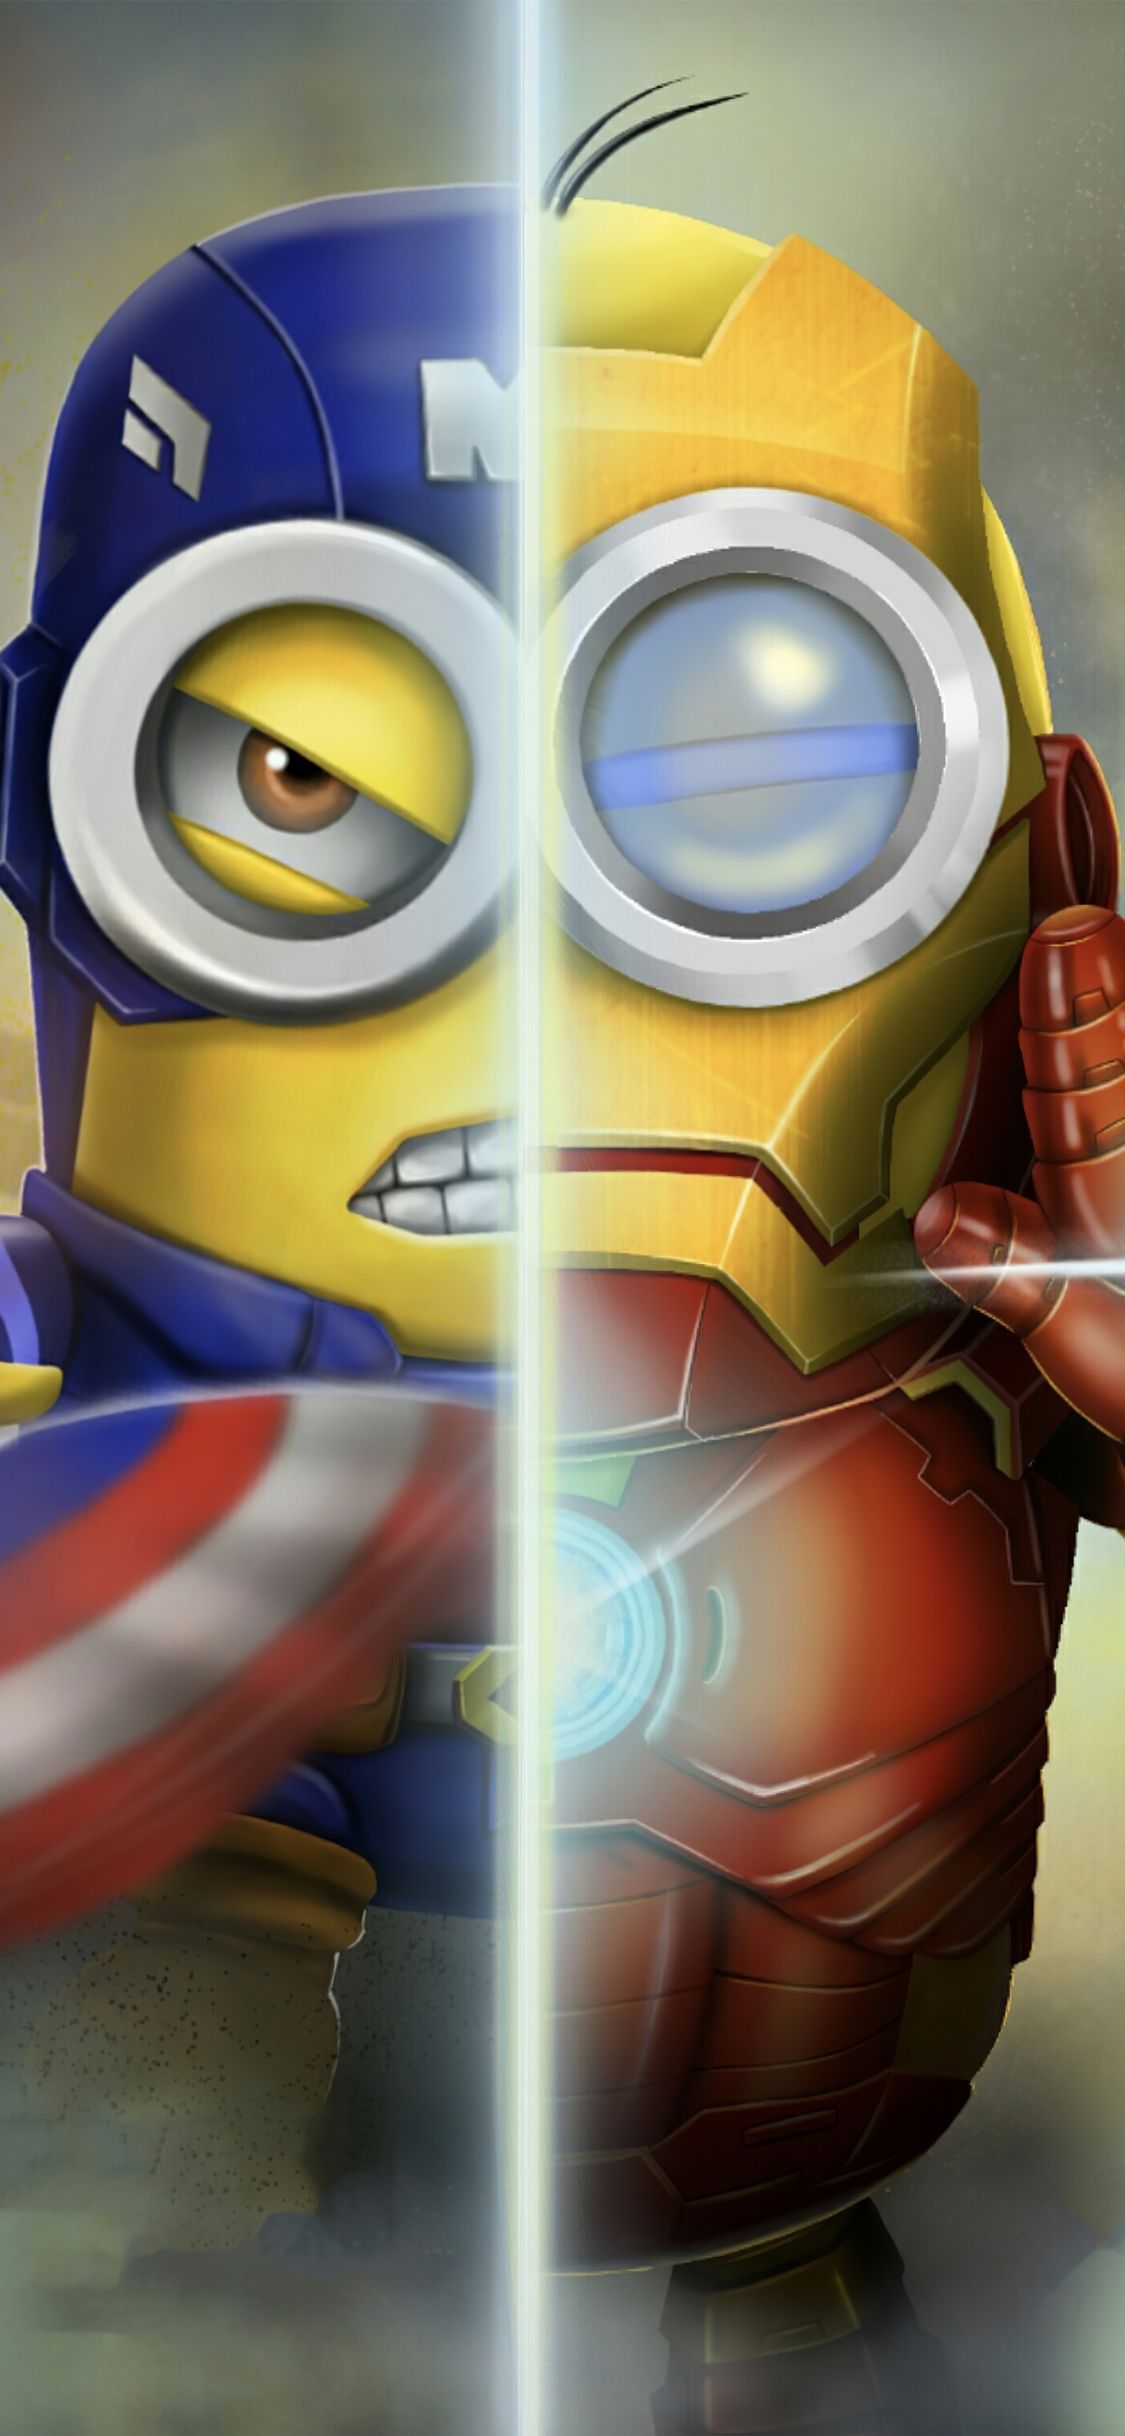 Minion As Iron Man And Captain America iPhone XS, iPhone